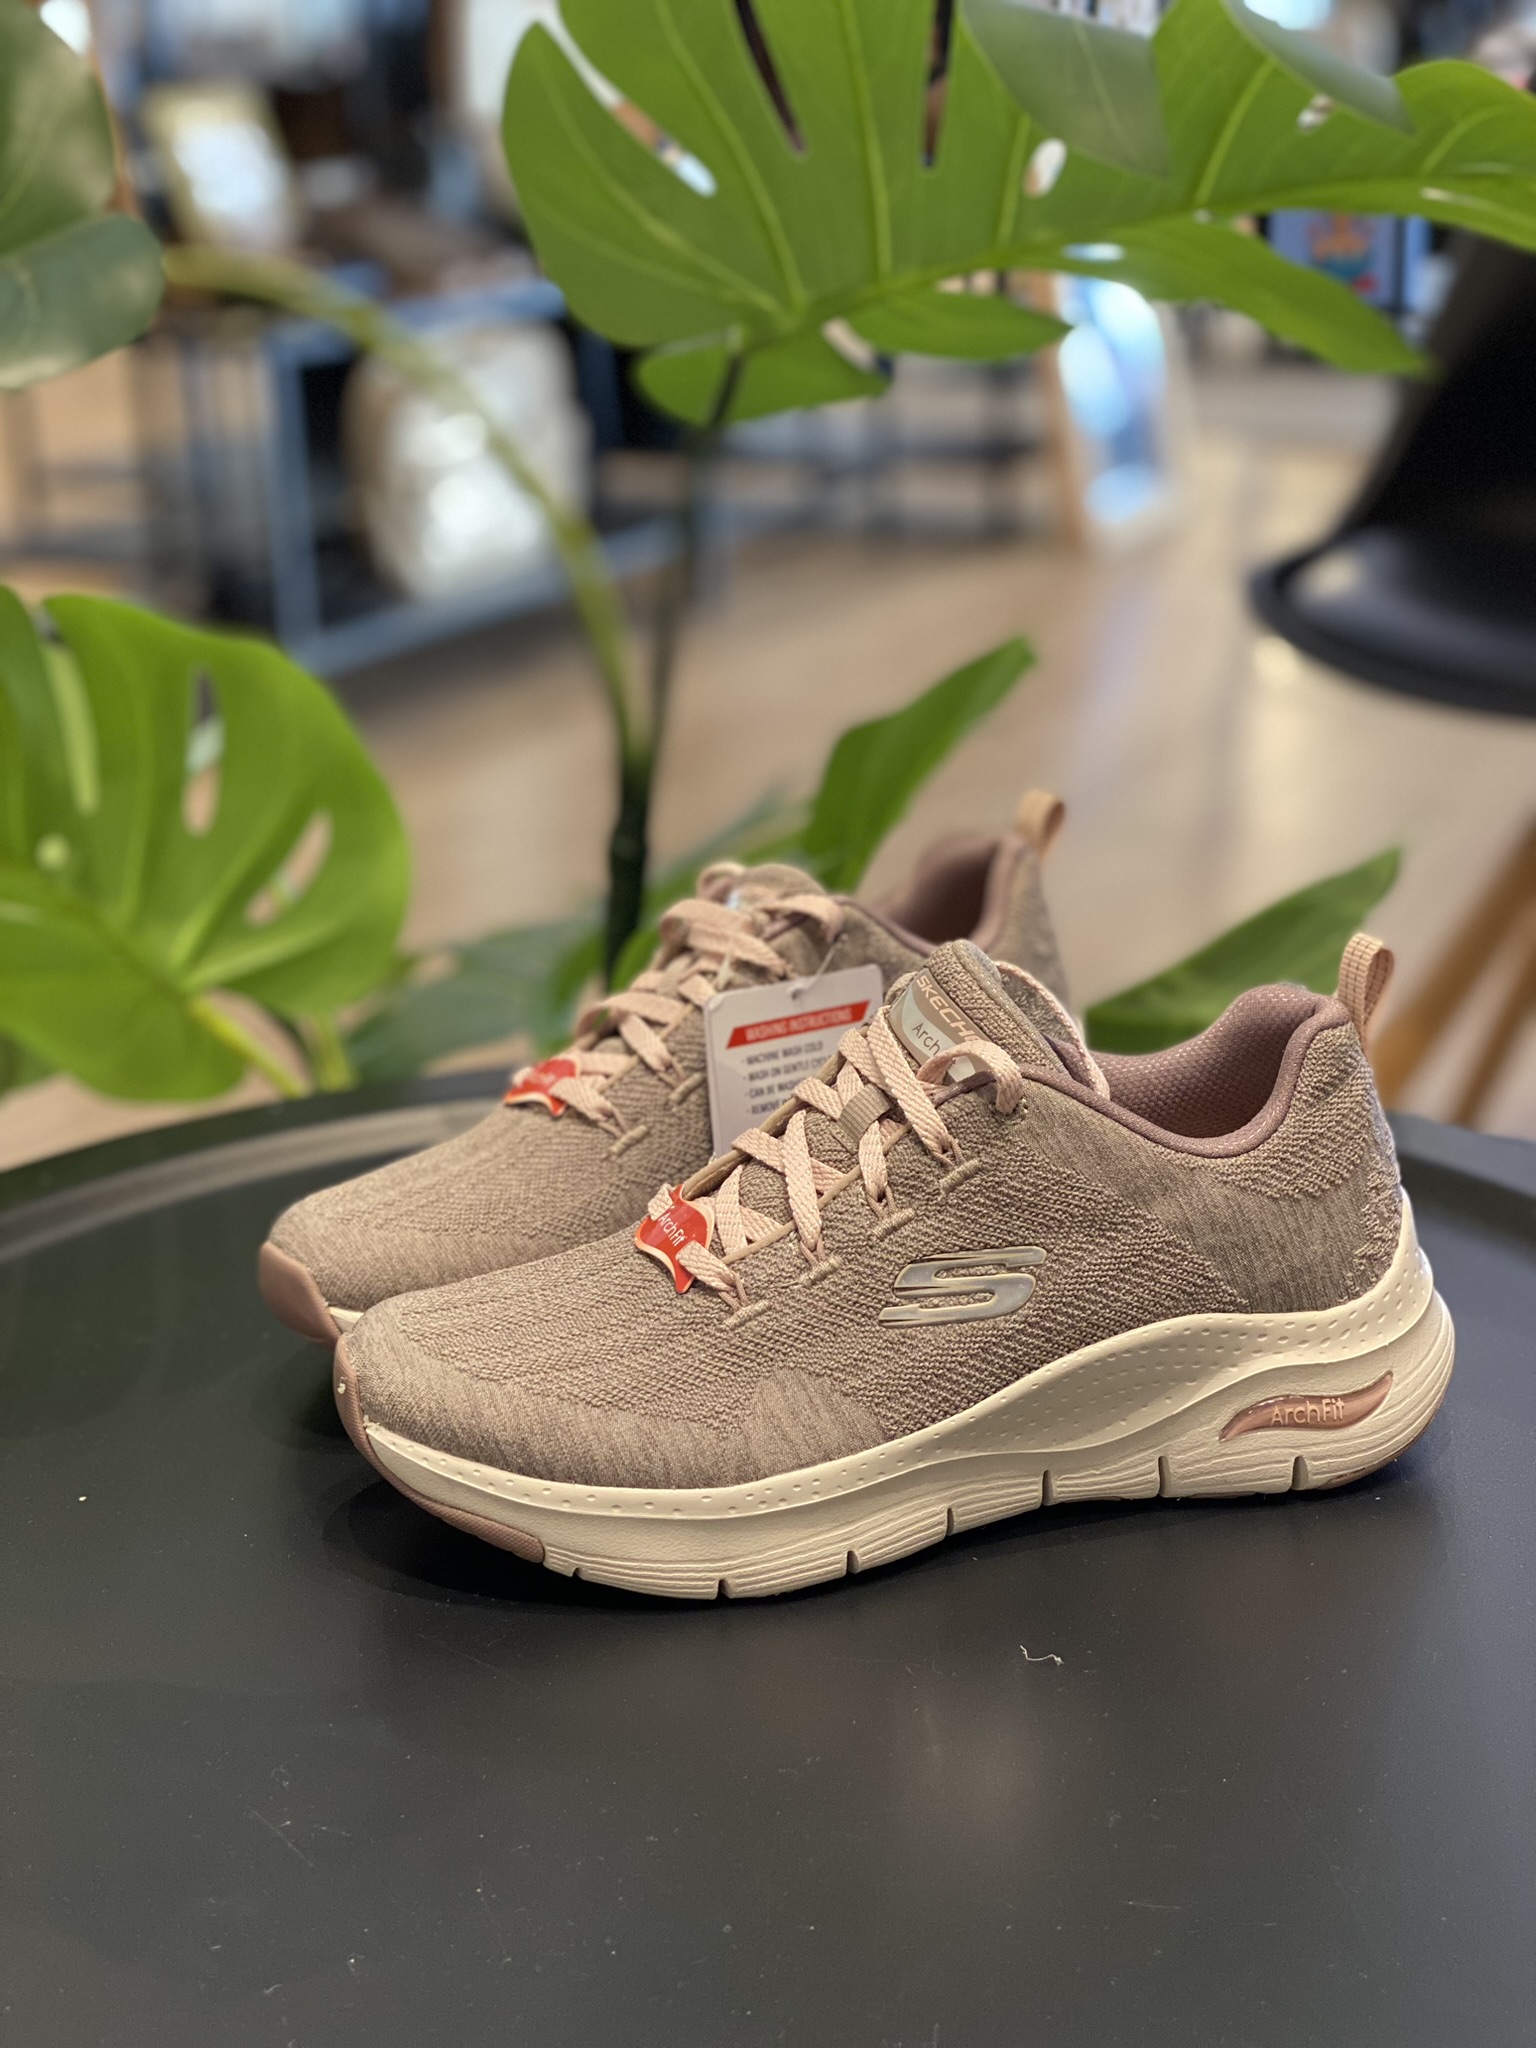 Skechers Arch Fit - Comfy Wave Nude